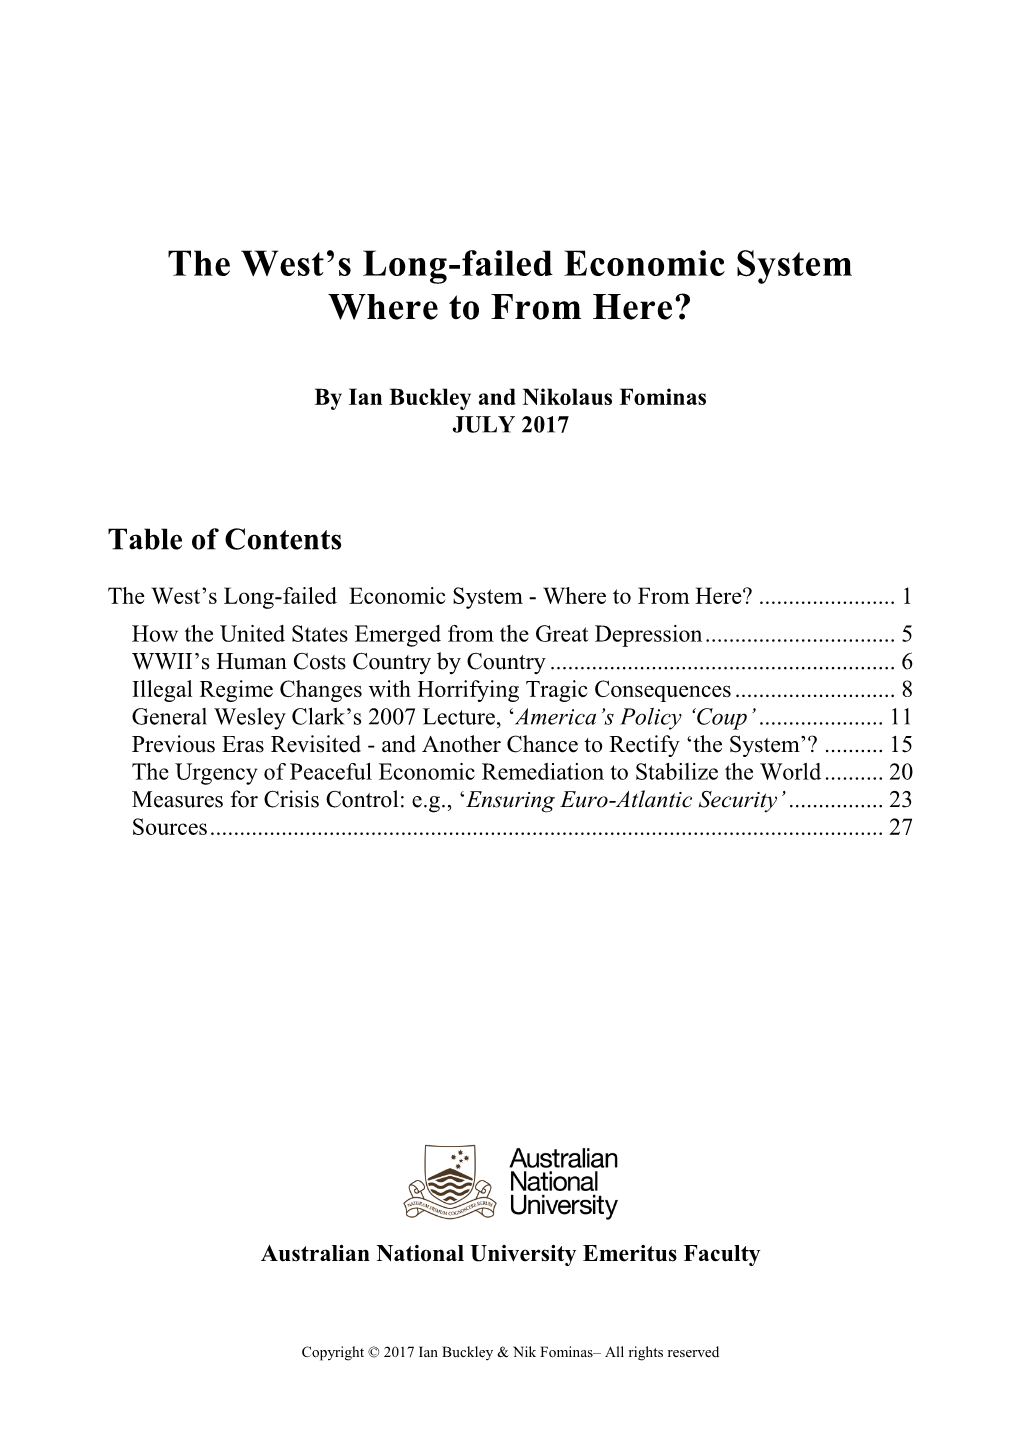 The West's Long-Failed Economic System Where to from Here?